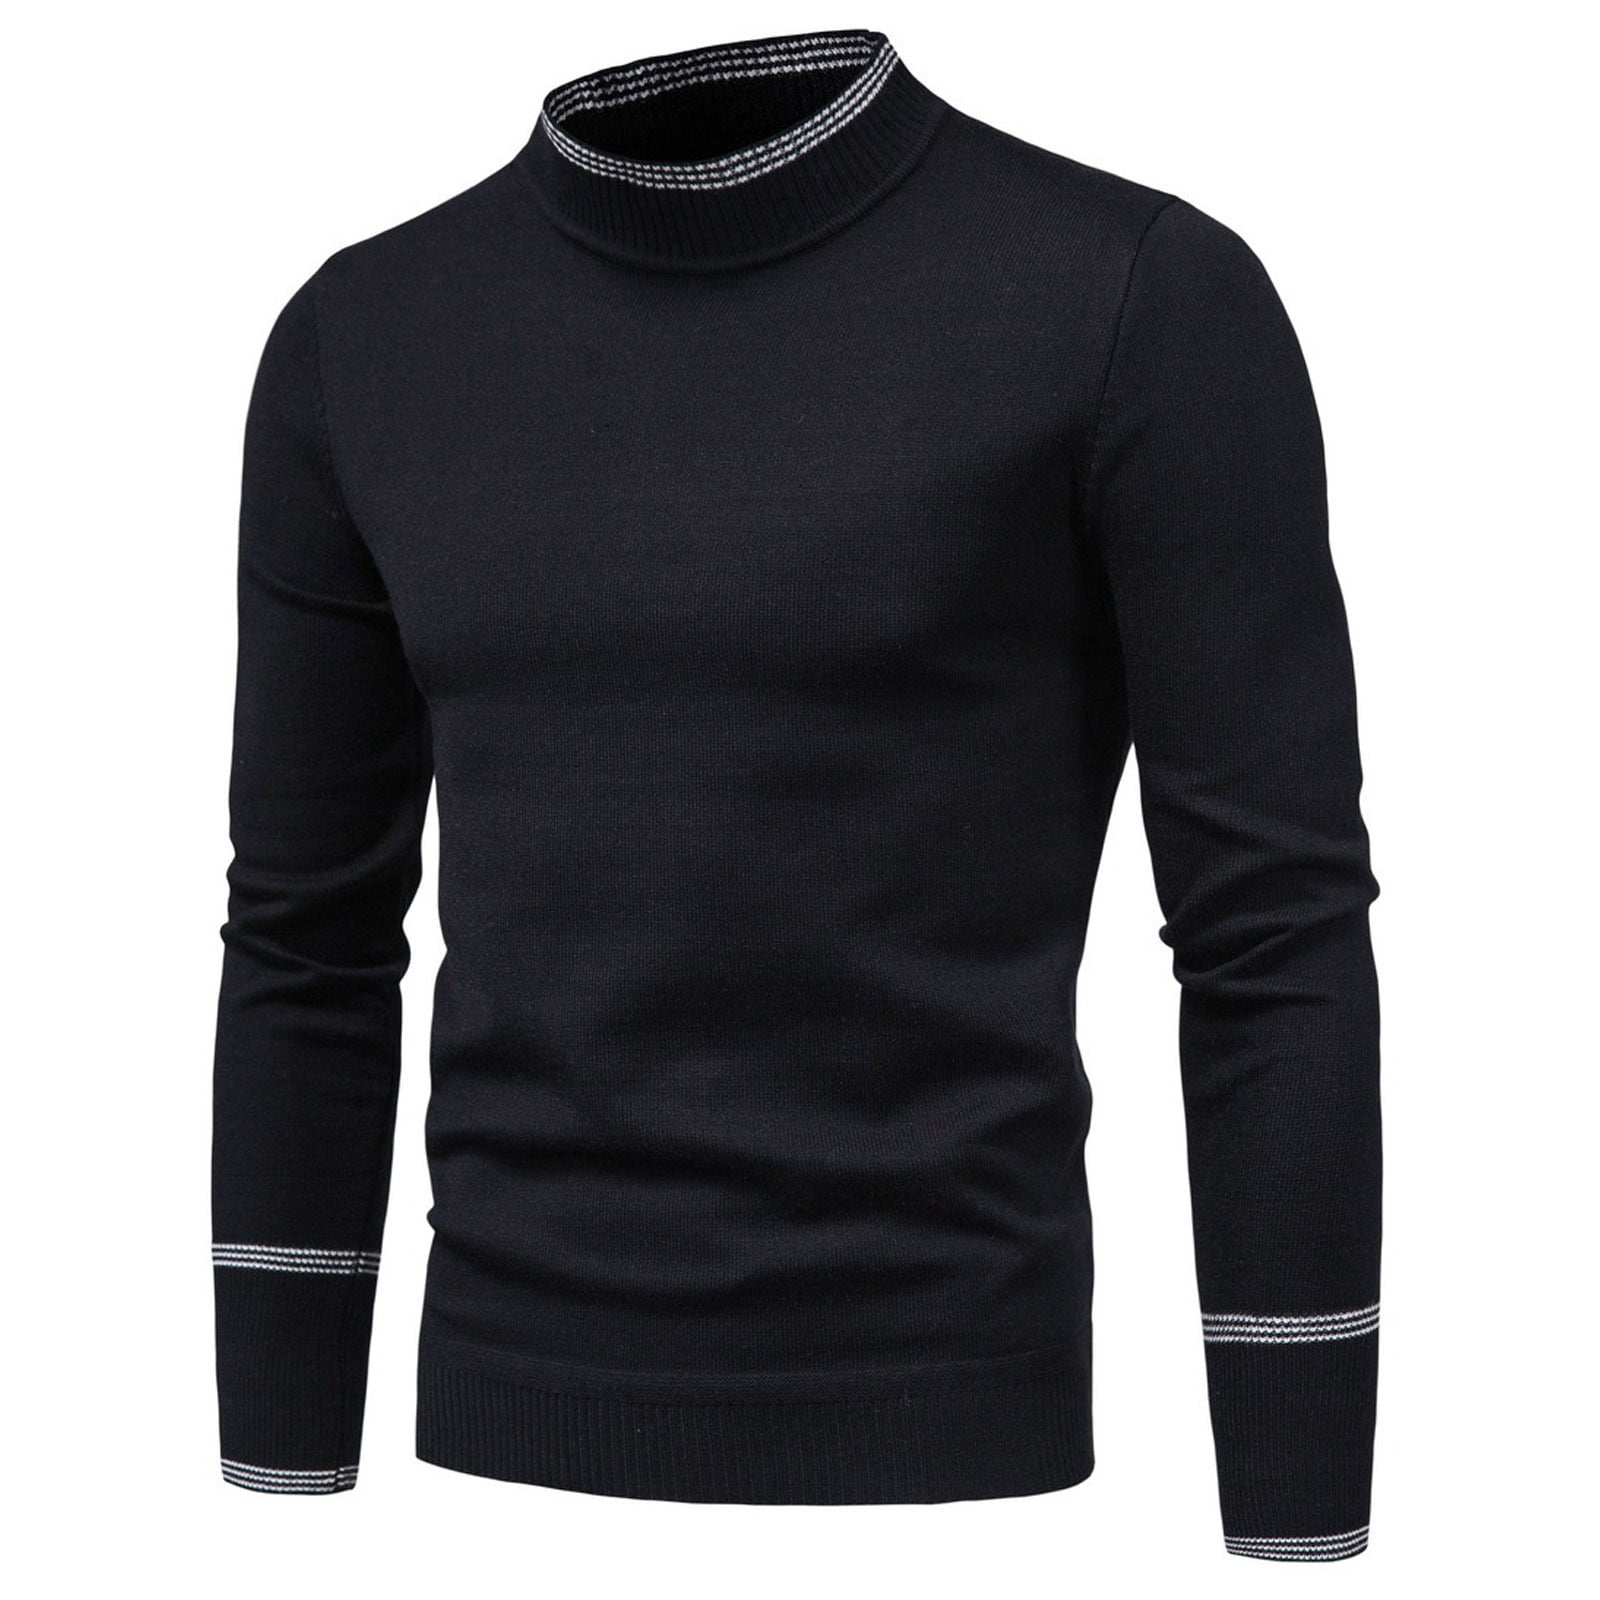 Top Sweater Pullover Half Knitted Solid Turtleneck Men's Pullover ...